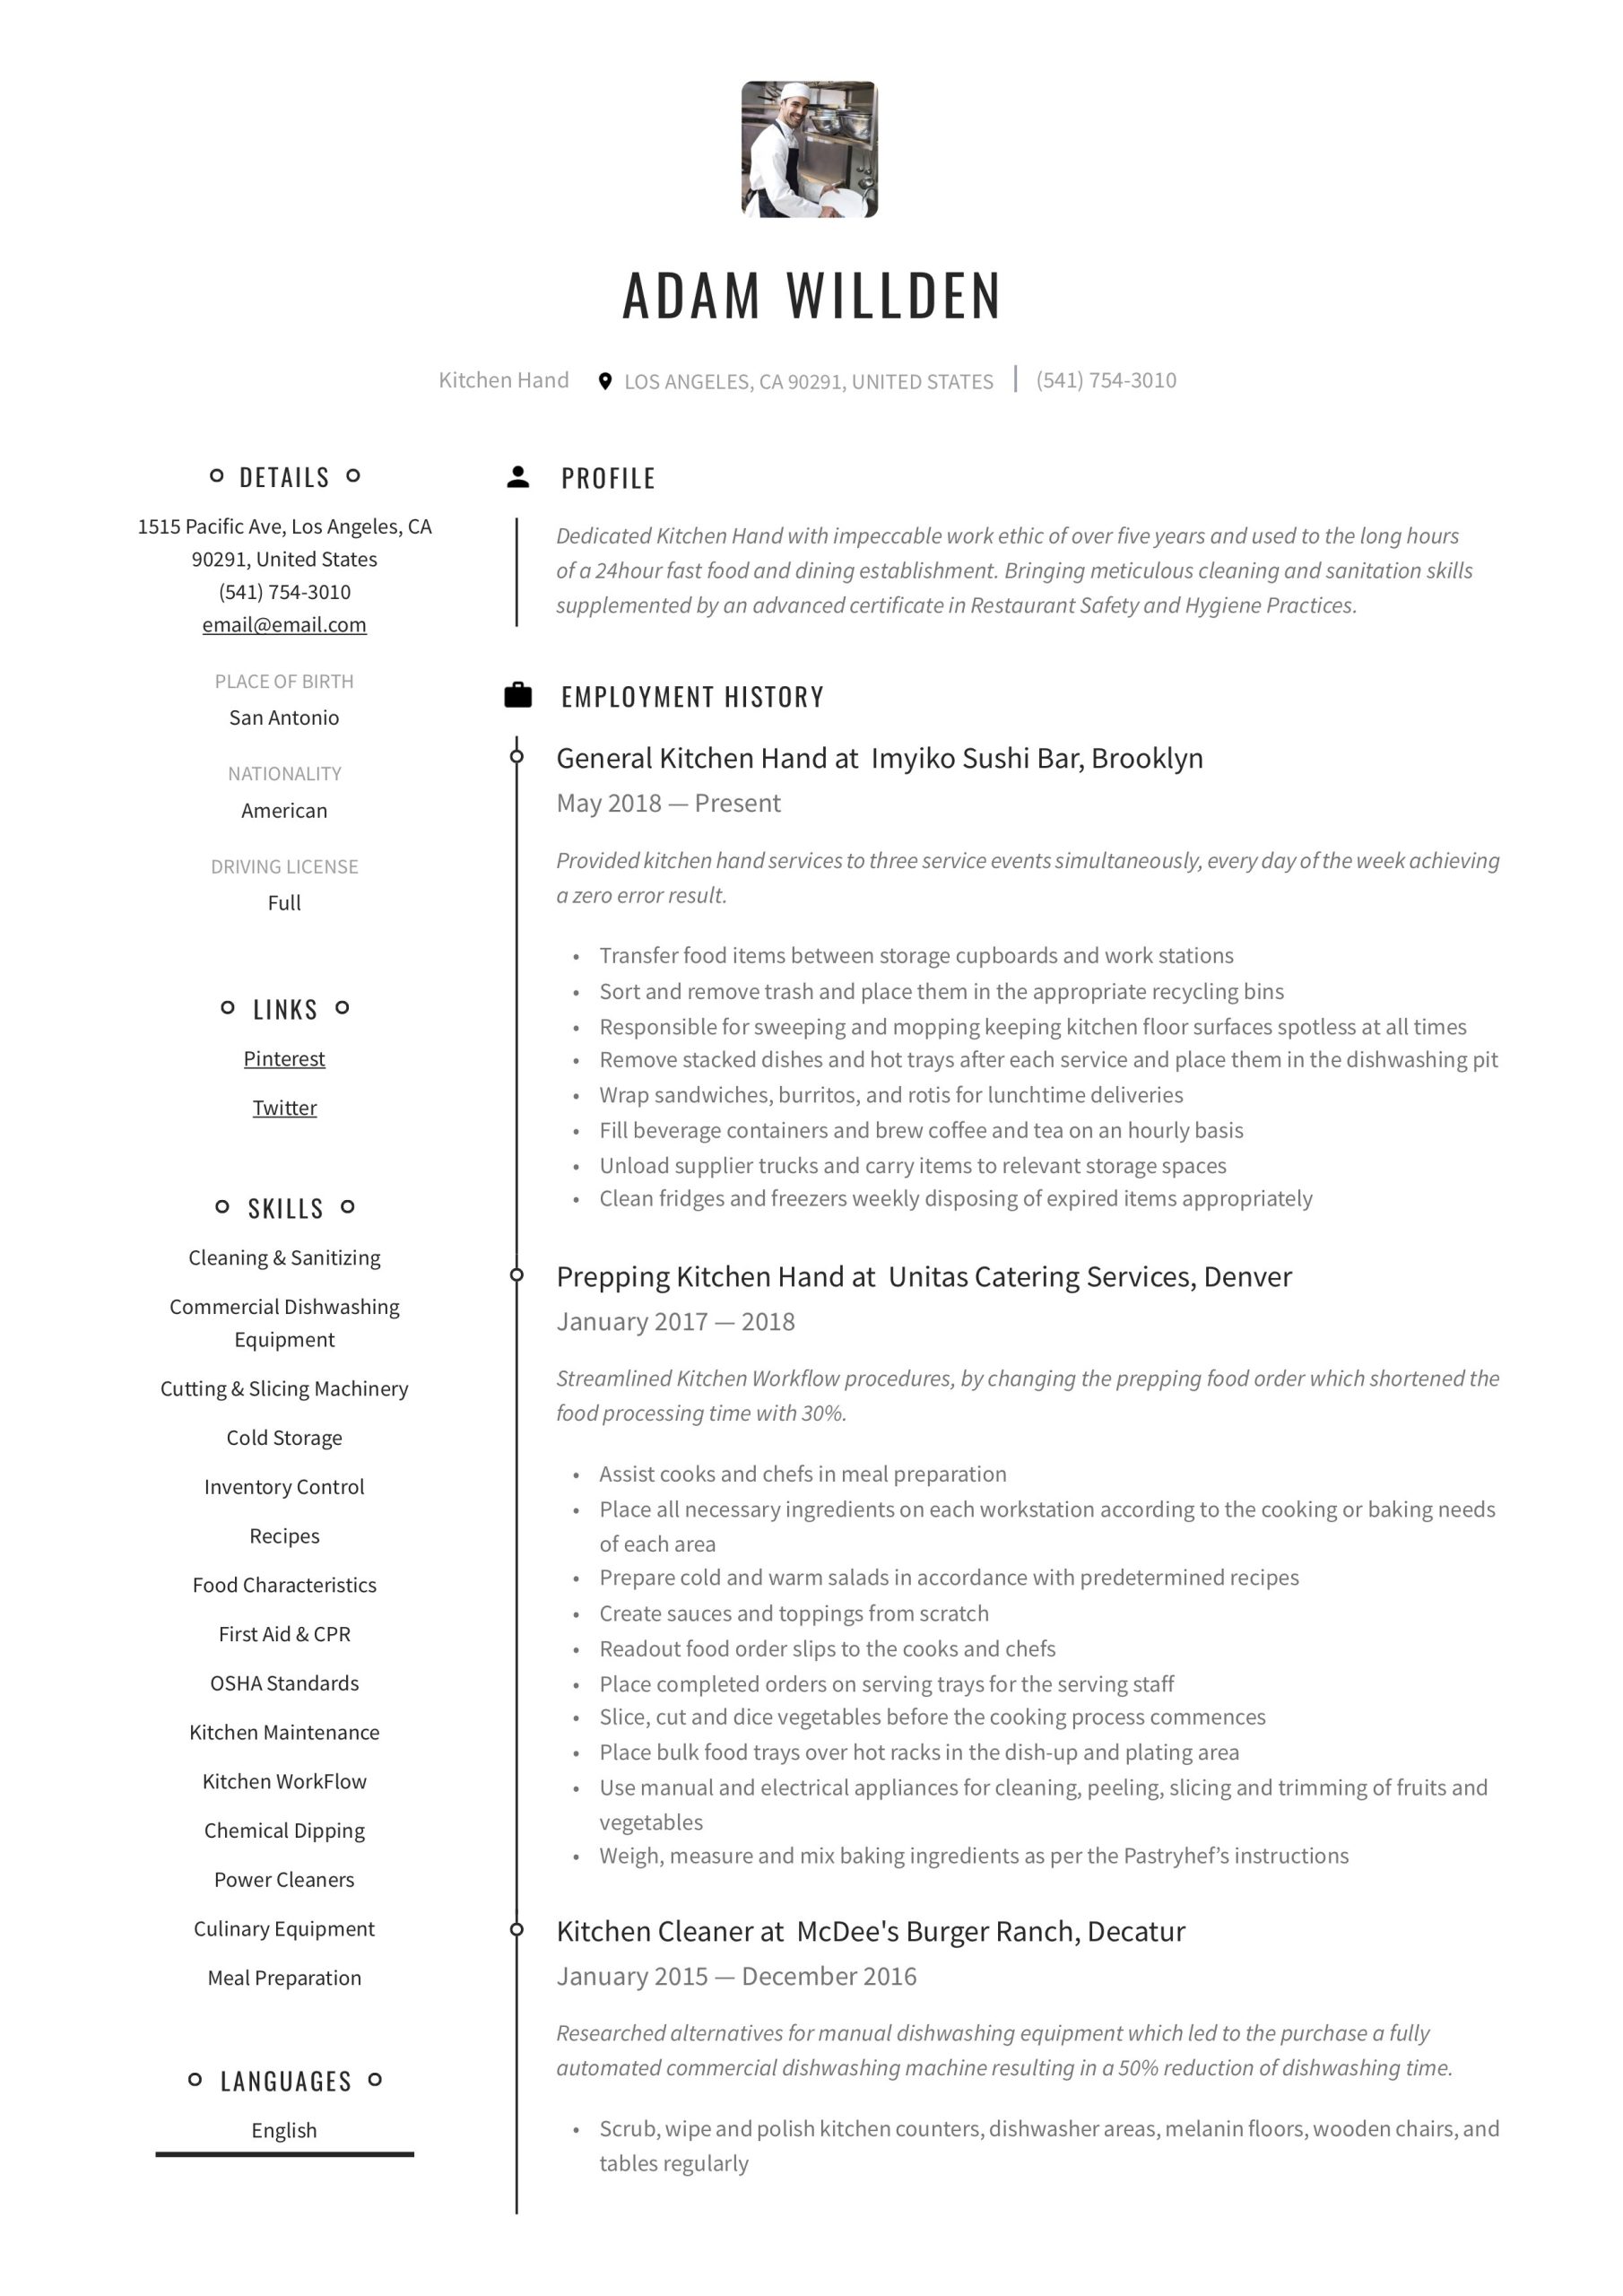 Top Golf Cook Staff Job Resume Sample Kitchen Hand Resume & Writing Guide  12 Free Templates 2020